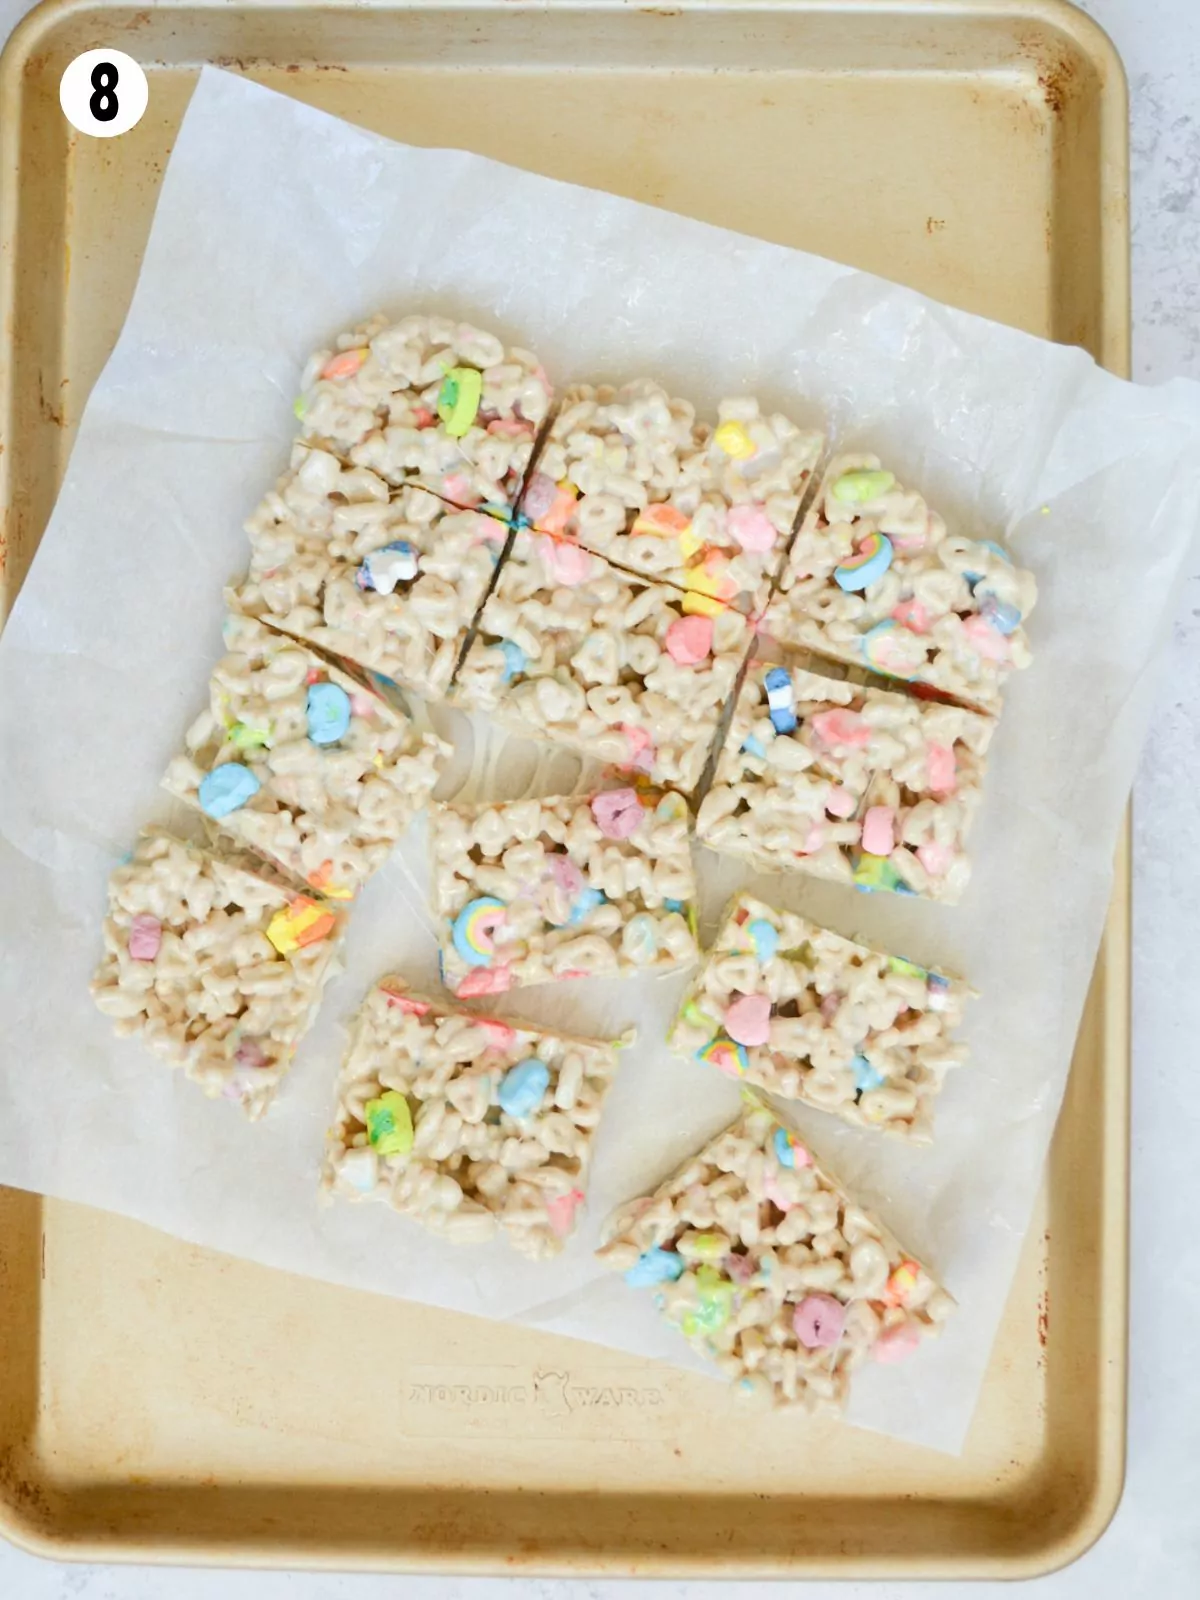 sliced cereal marshmallow bars made with Lucky Charms cereal.